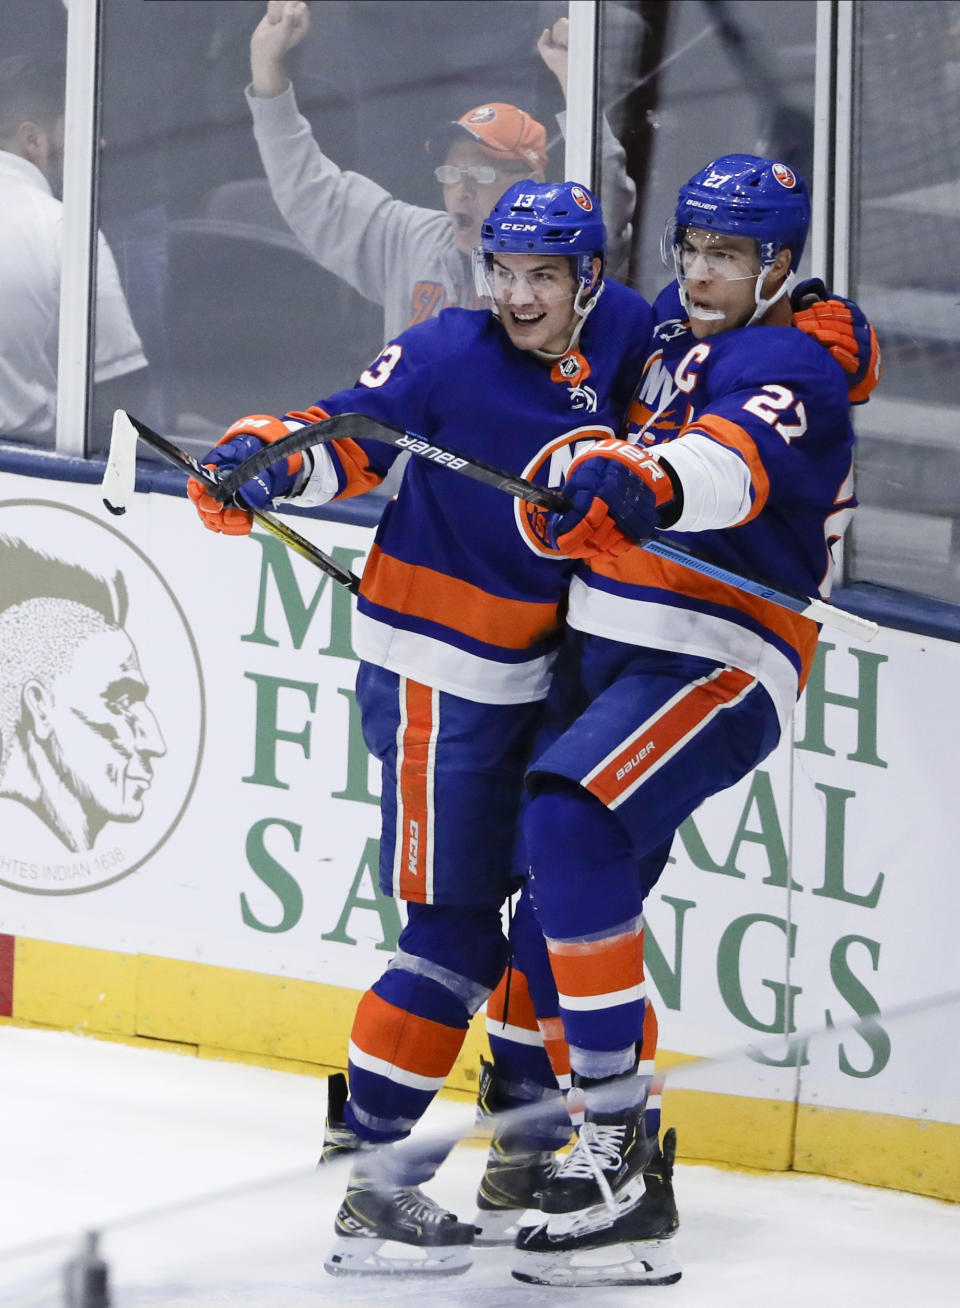 New York Islanders' Anders Lee (27) celebrates with Mathew Barzal after scoring a goal during the third period of the team's NHL hockey game against the Tampa Bay Lightning on Friday, Nov. 1, 2019, in Uniondale, N.Y. The Islanders won 5-2. (AP Photo/Frank Franklin II)